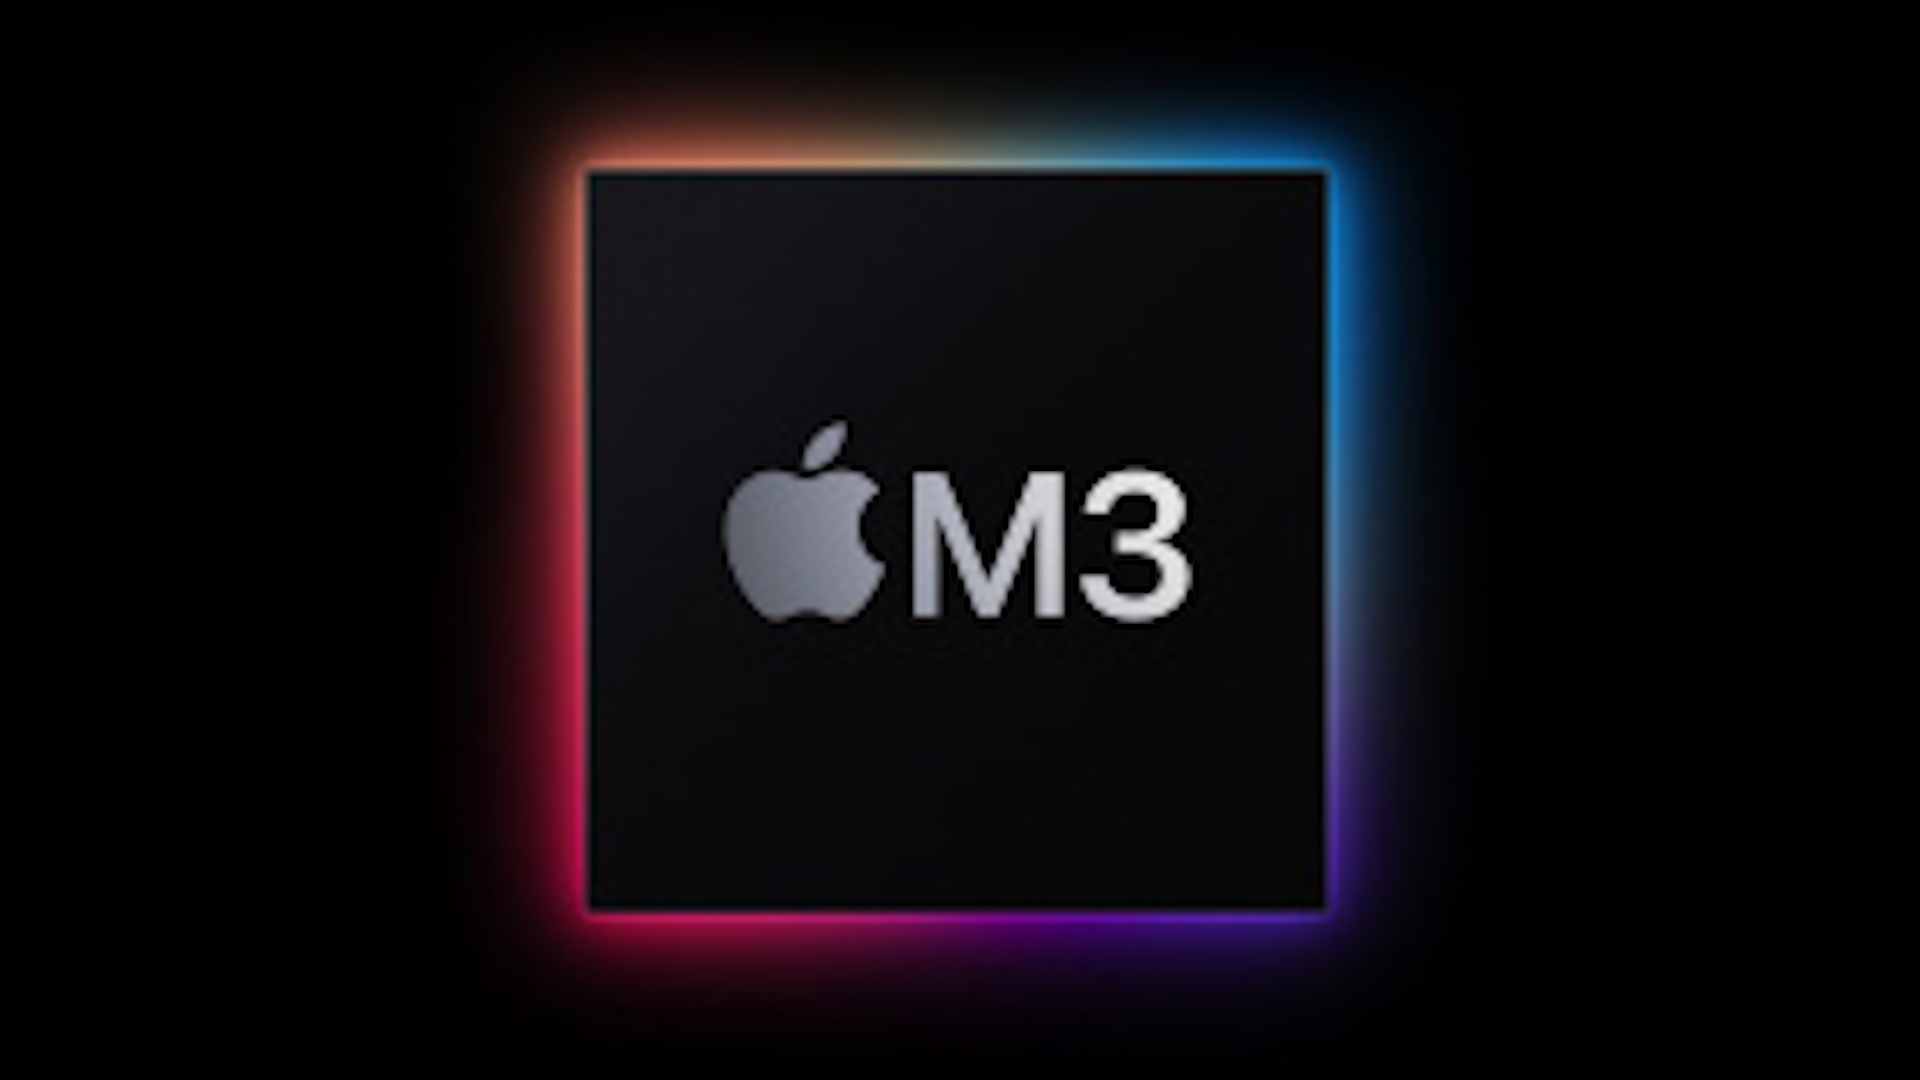 The next 24-inch iMac will have an M3 chip, Apple is reportedly skipping the M2 generation of chips entirely